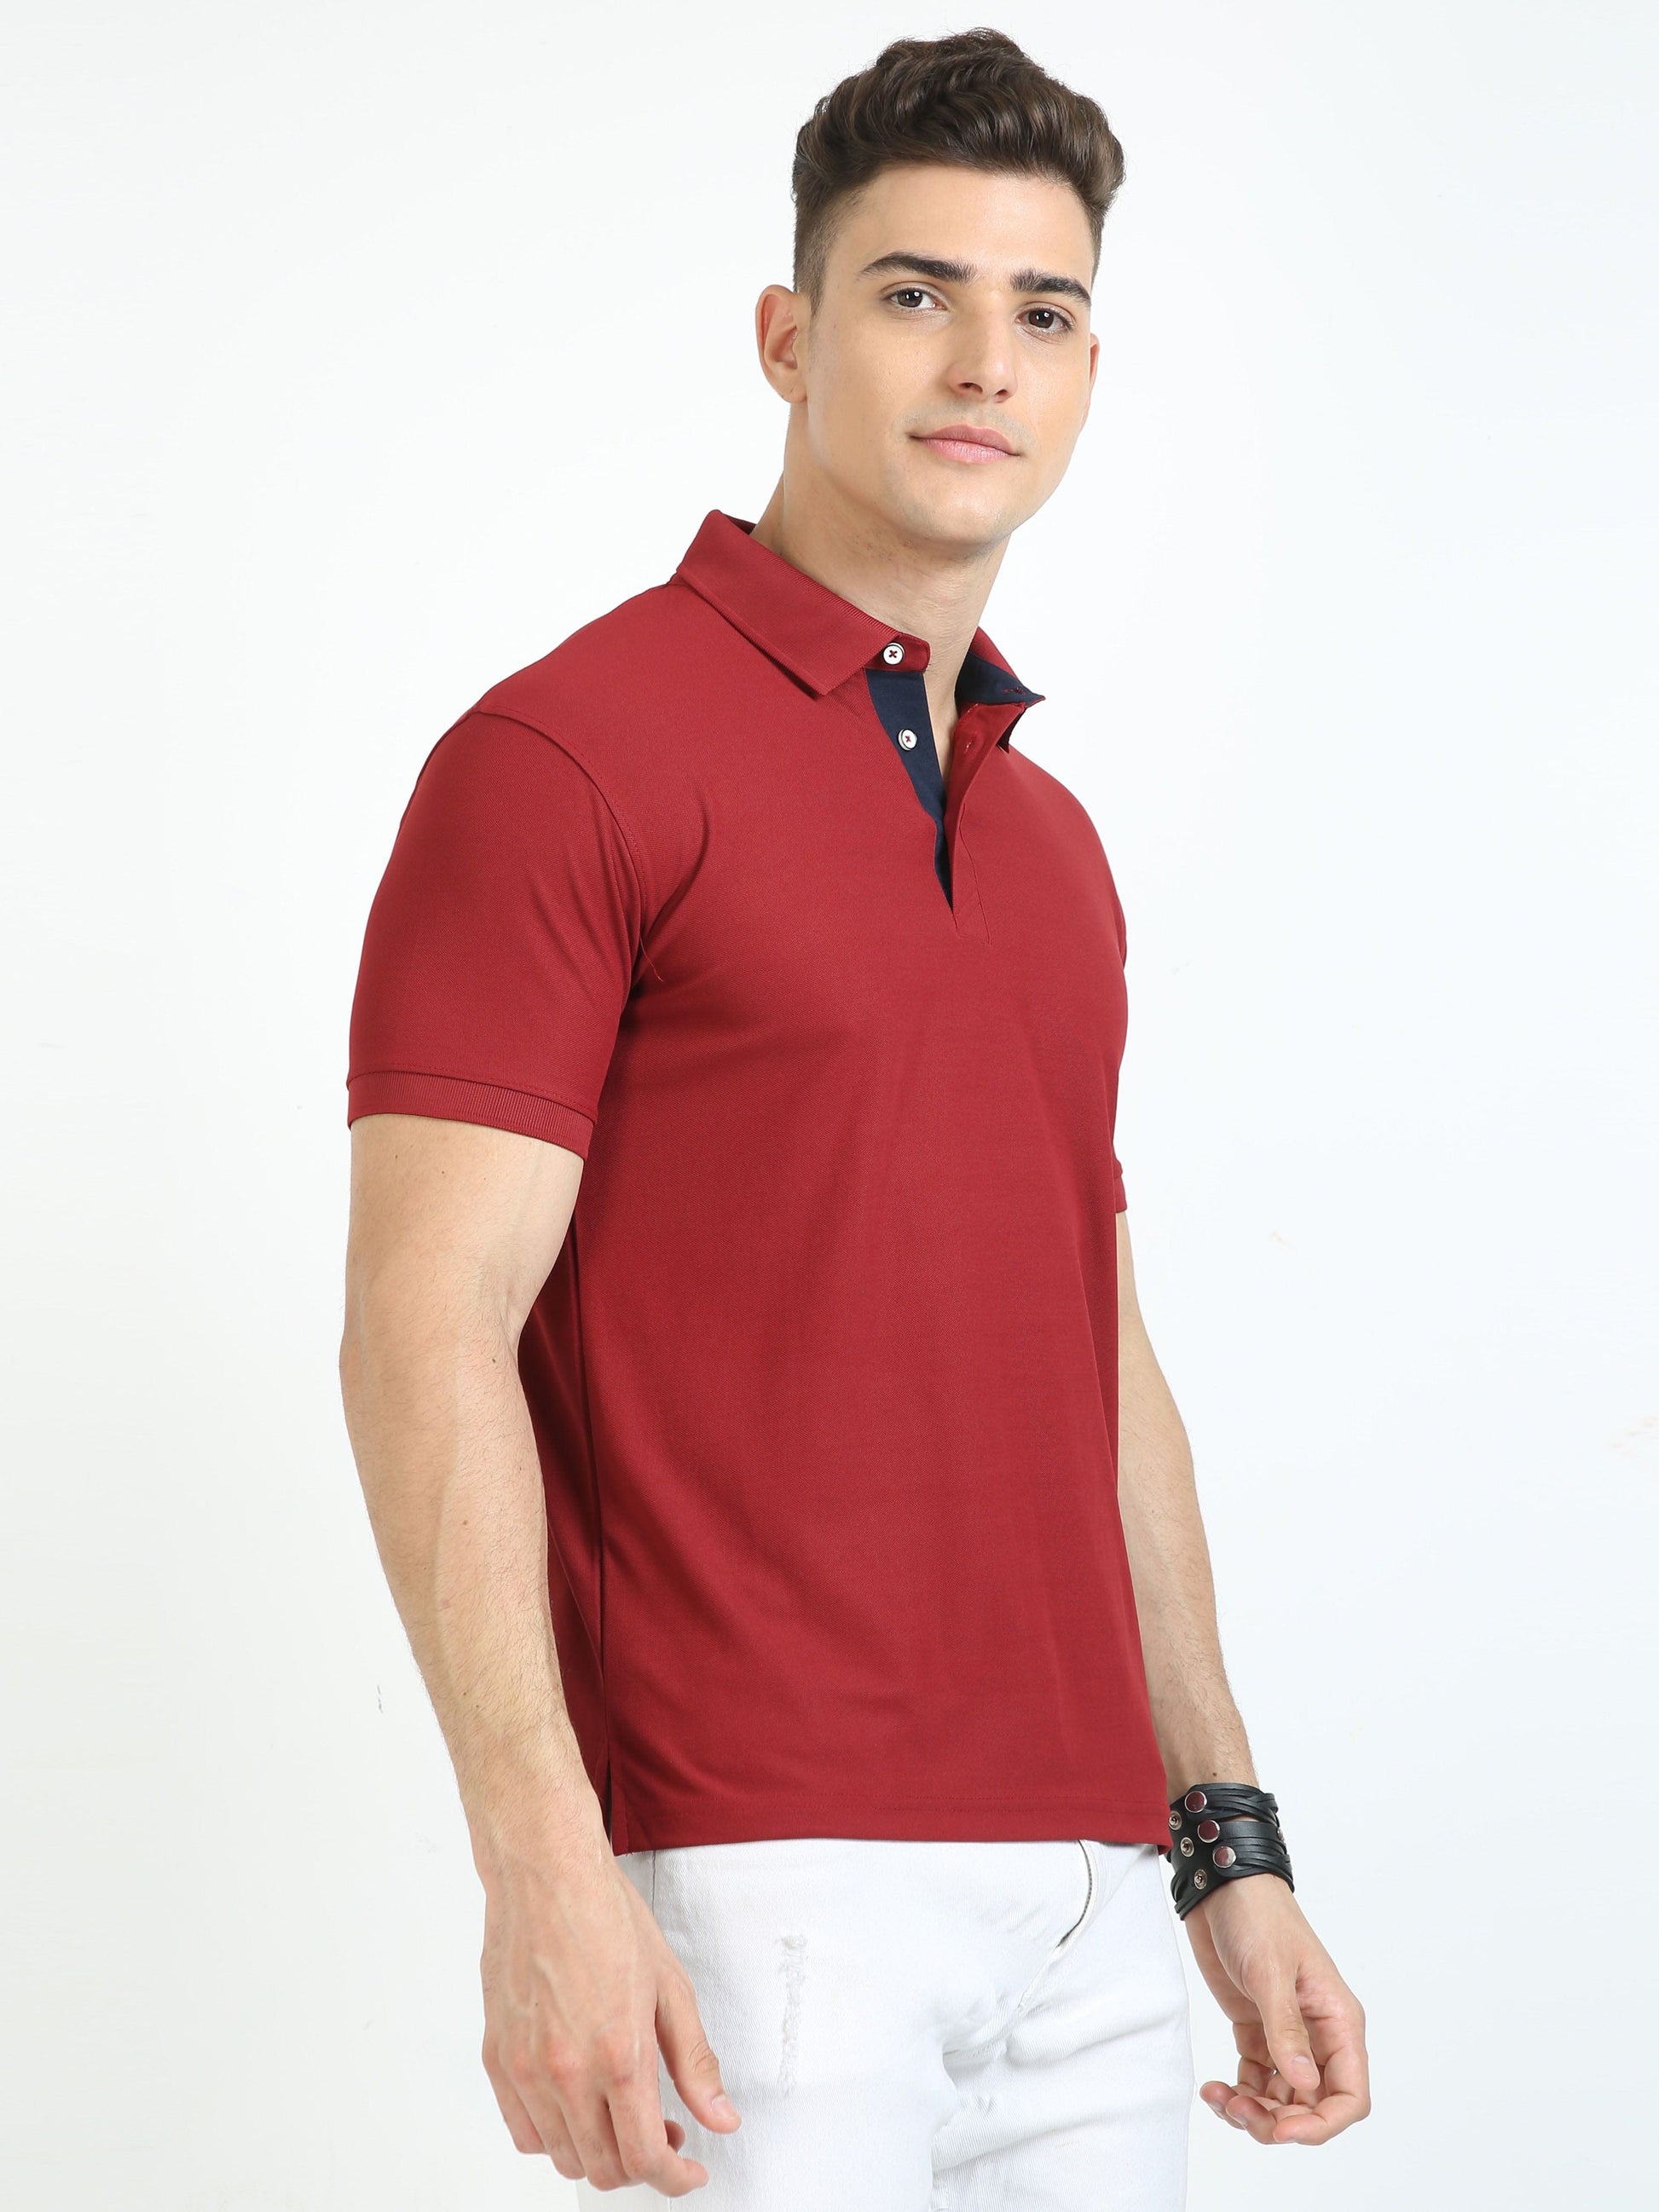 French Wine Men's Polo T-shirt